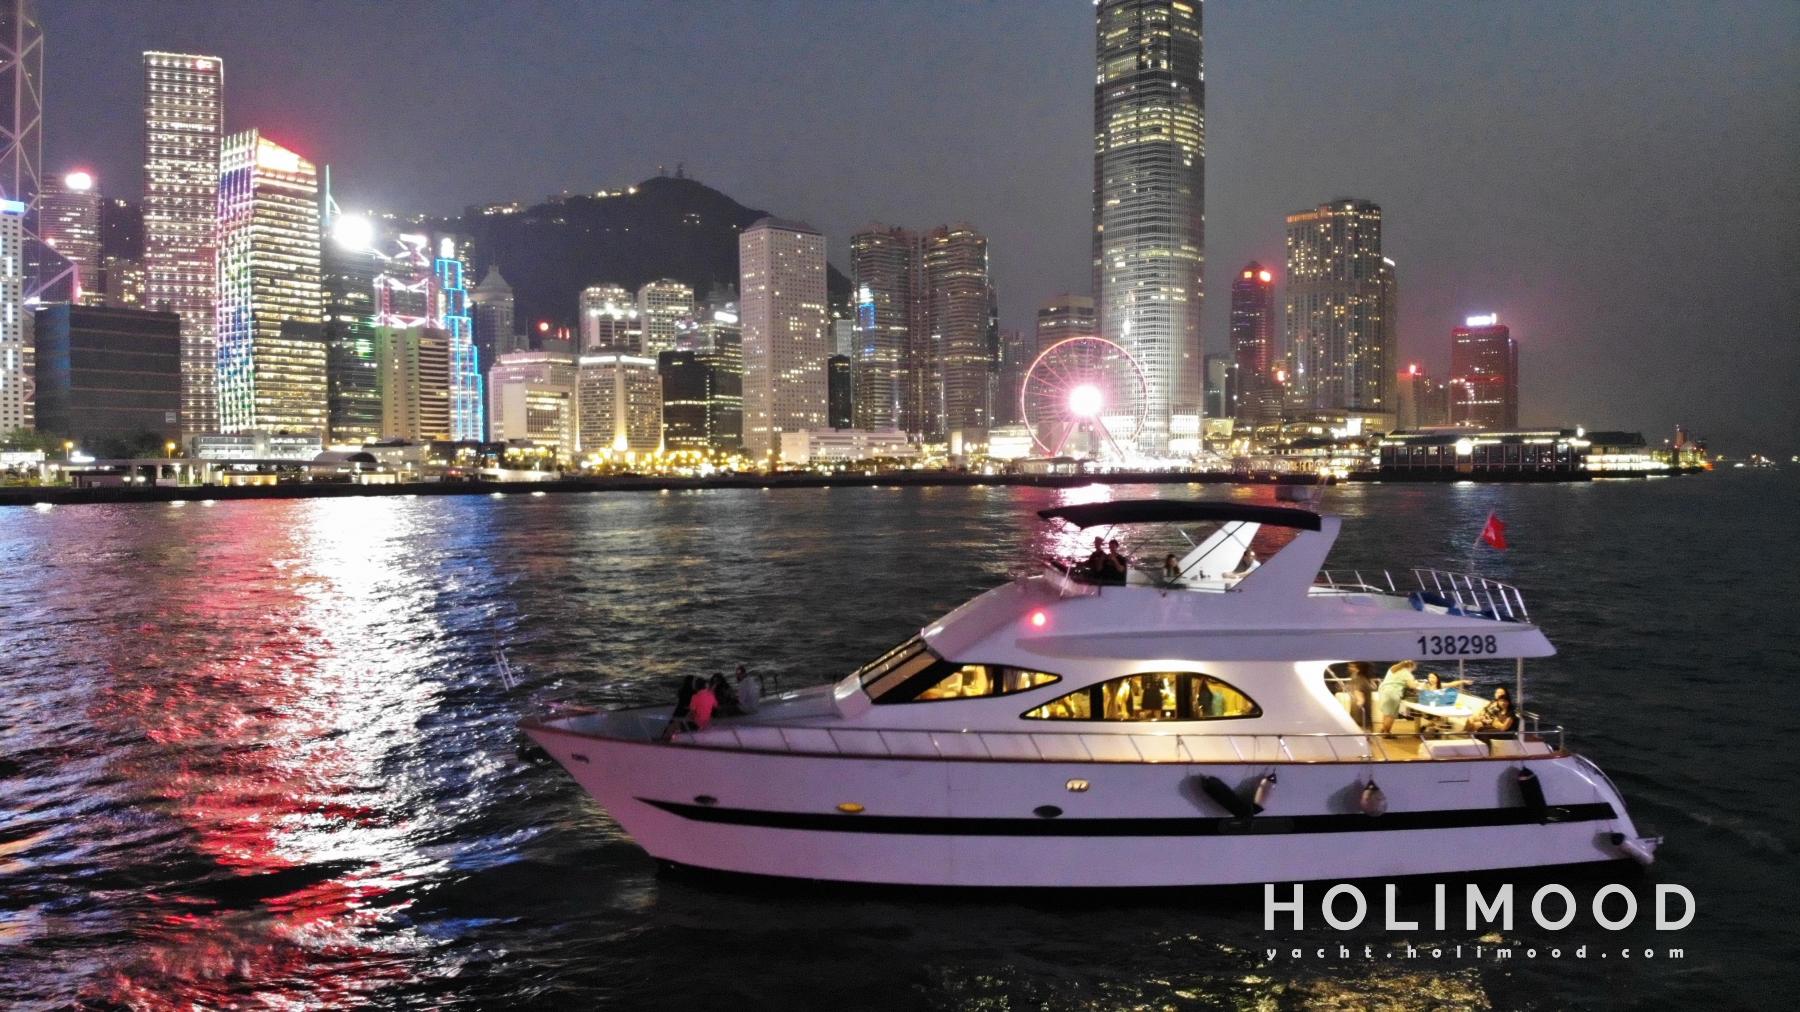 LE02 City Cruiser with Disc & DJ system, a Sea Club in Victoria Harbour! 15